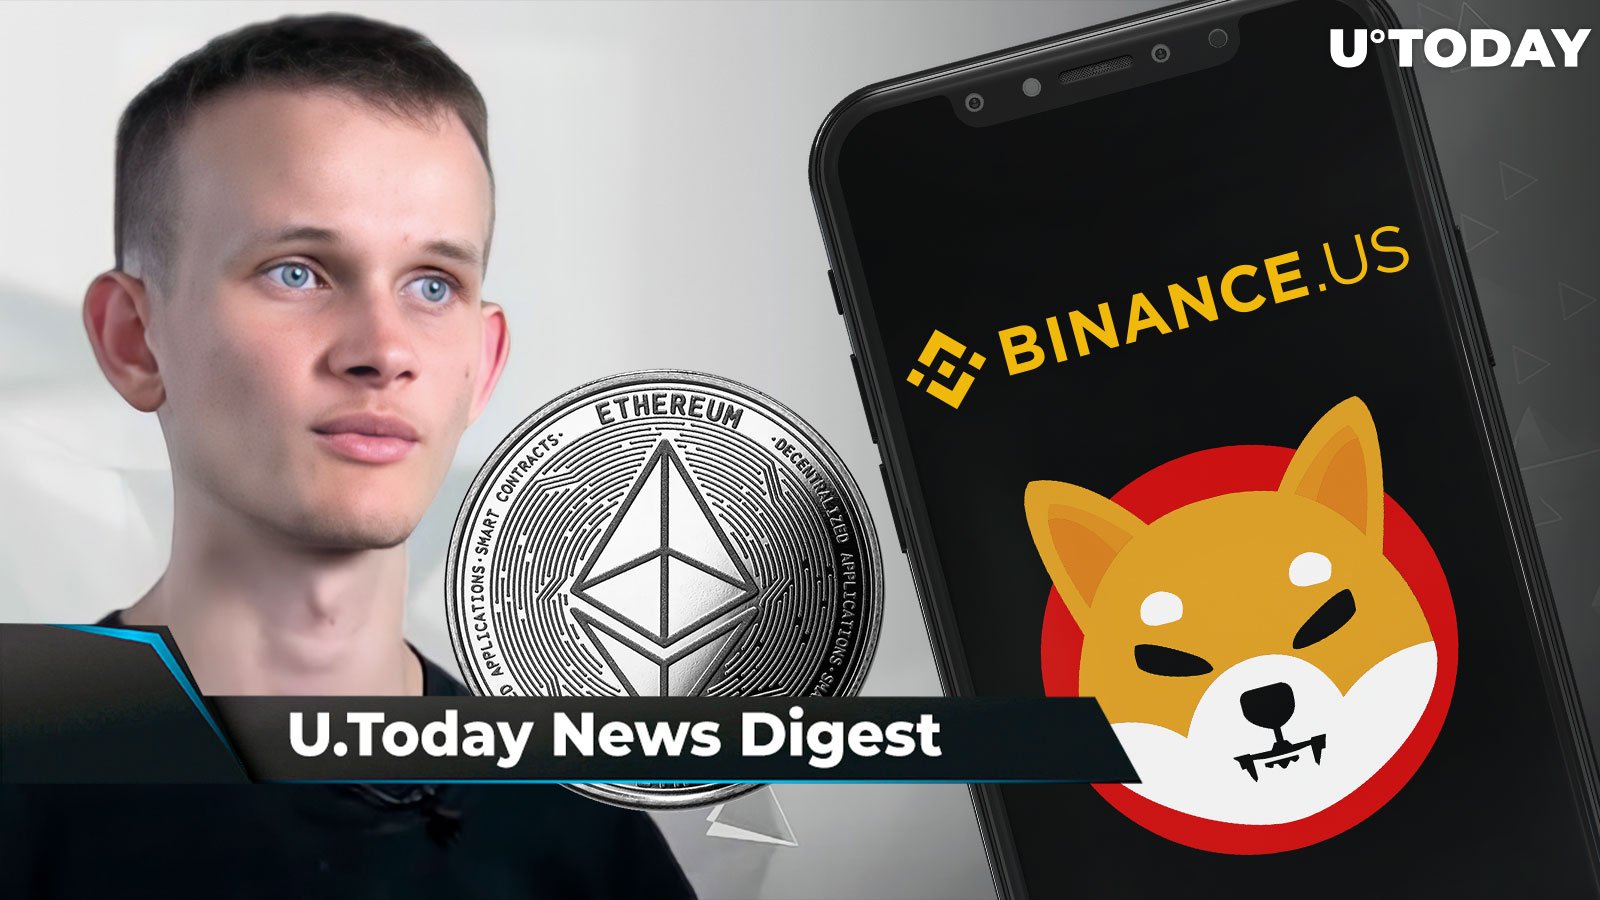 SHIB/USD Listed by Binance.US, SHIB Army Suggests Shytoshi's Real Name, Vitalik Buterin Sells Personal ETH Holdings: Crypto News Digest by U.Today